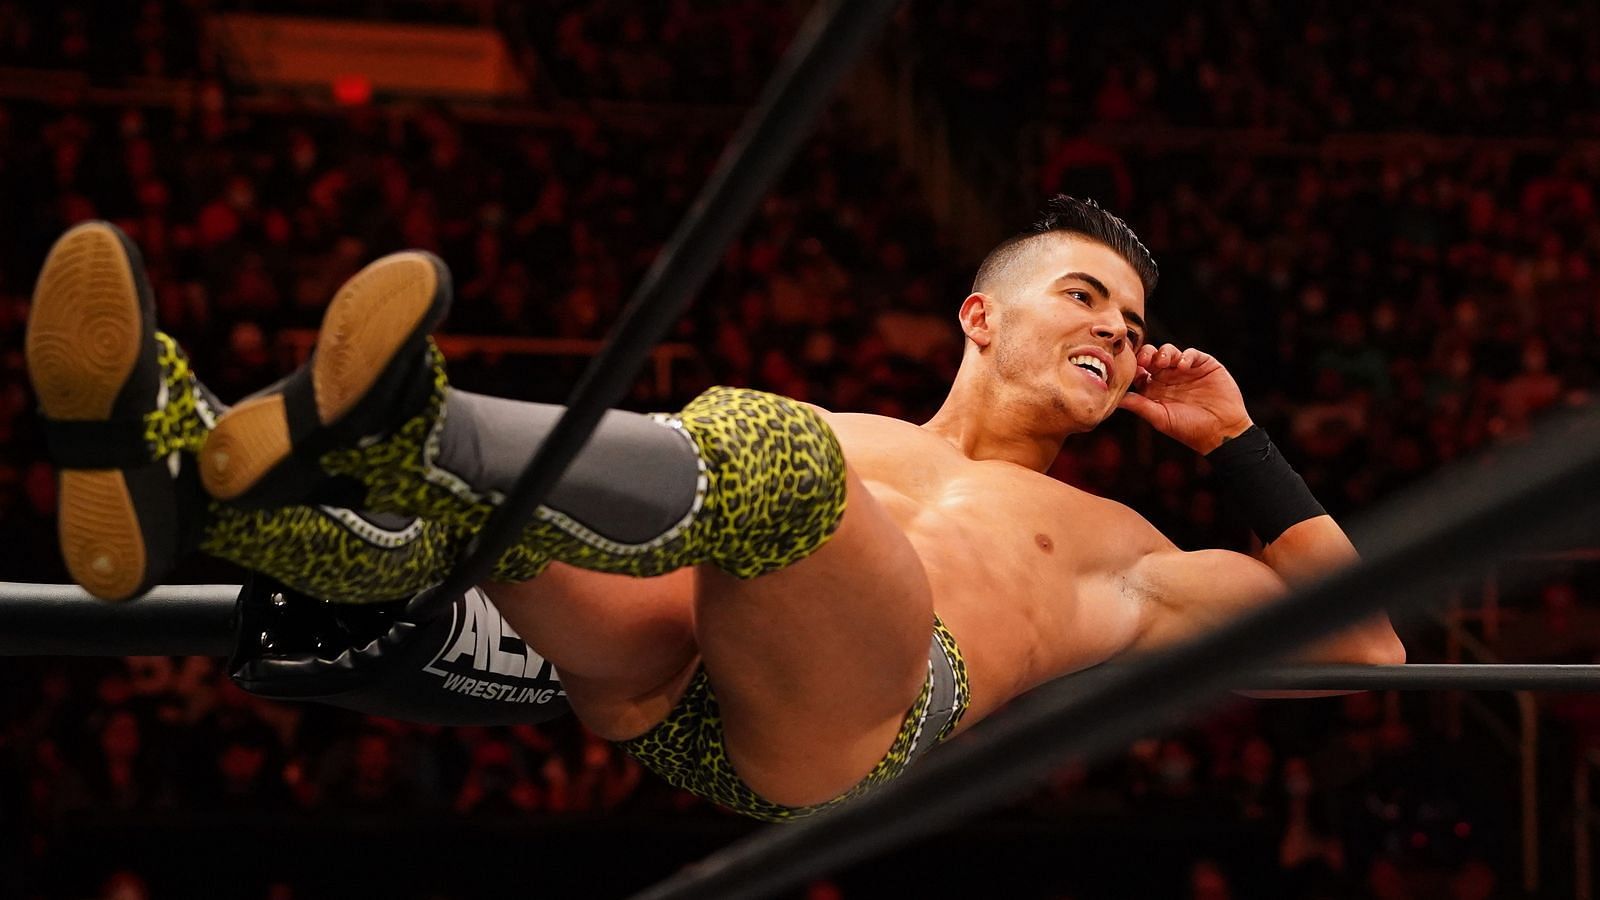 The Spanish God might be the most hated AEW star at the moment.